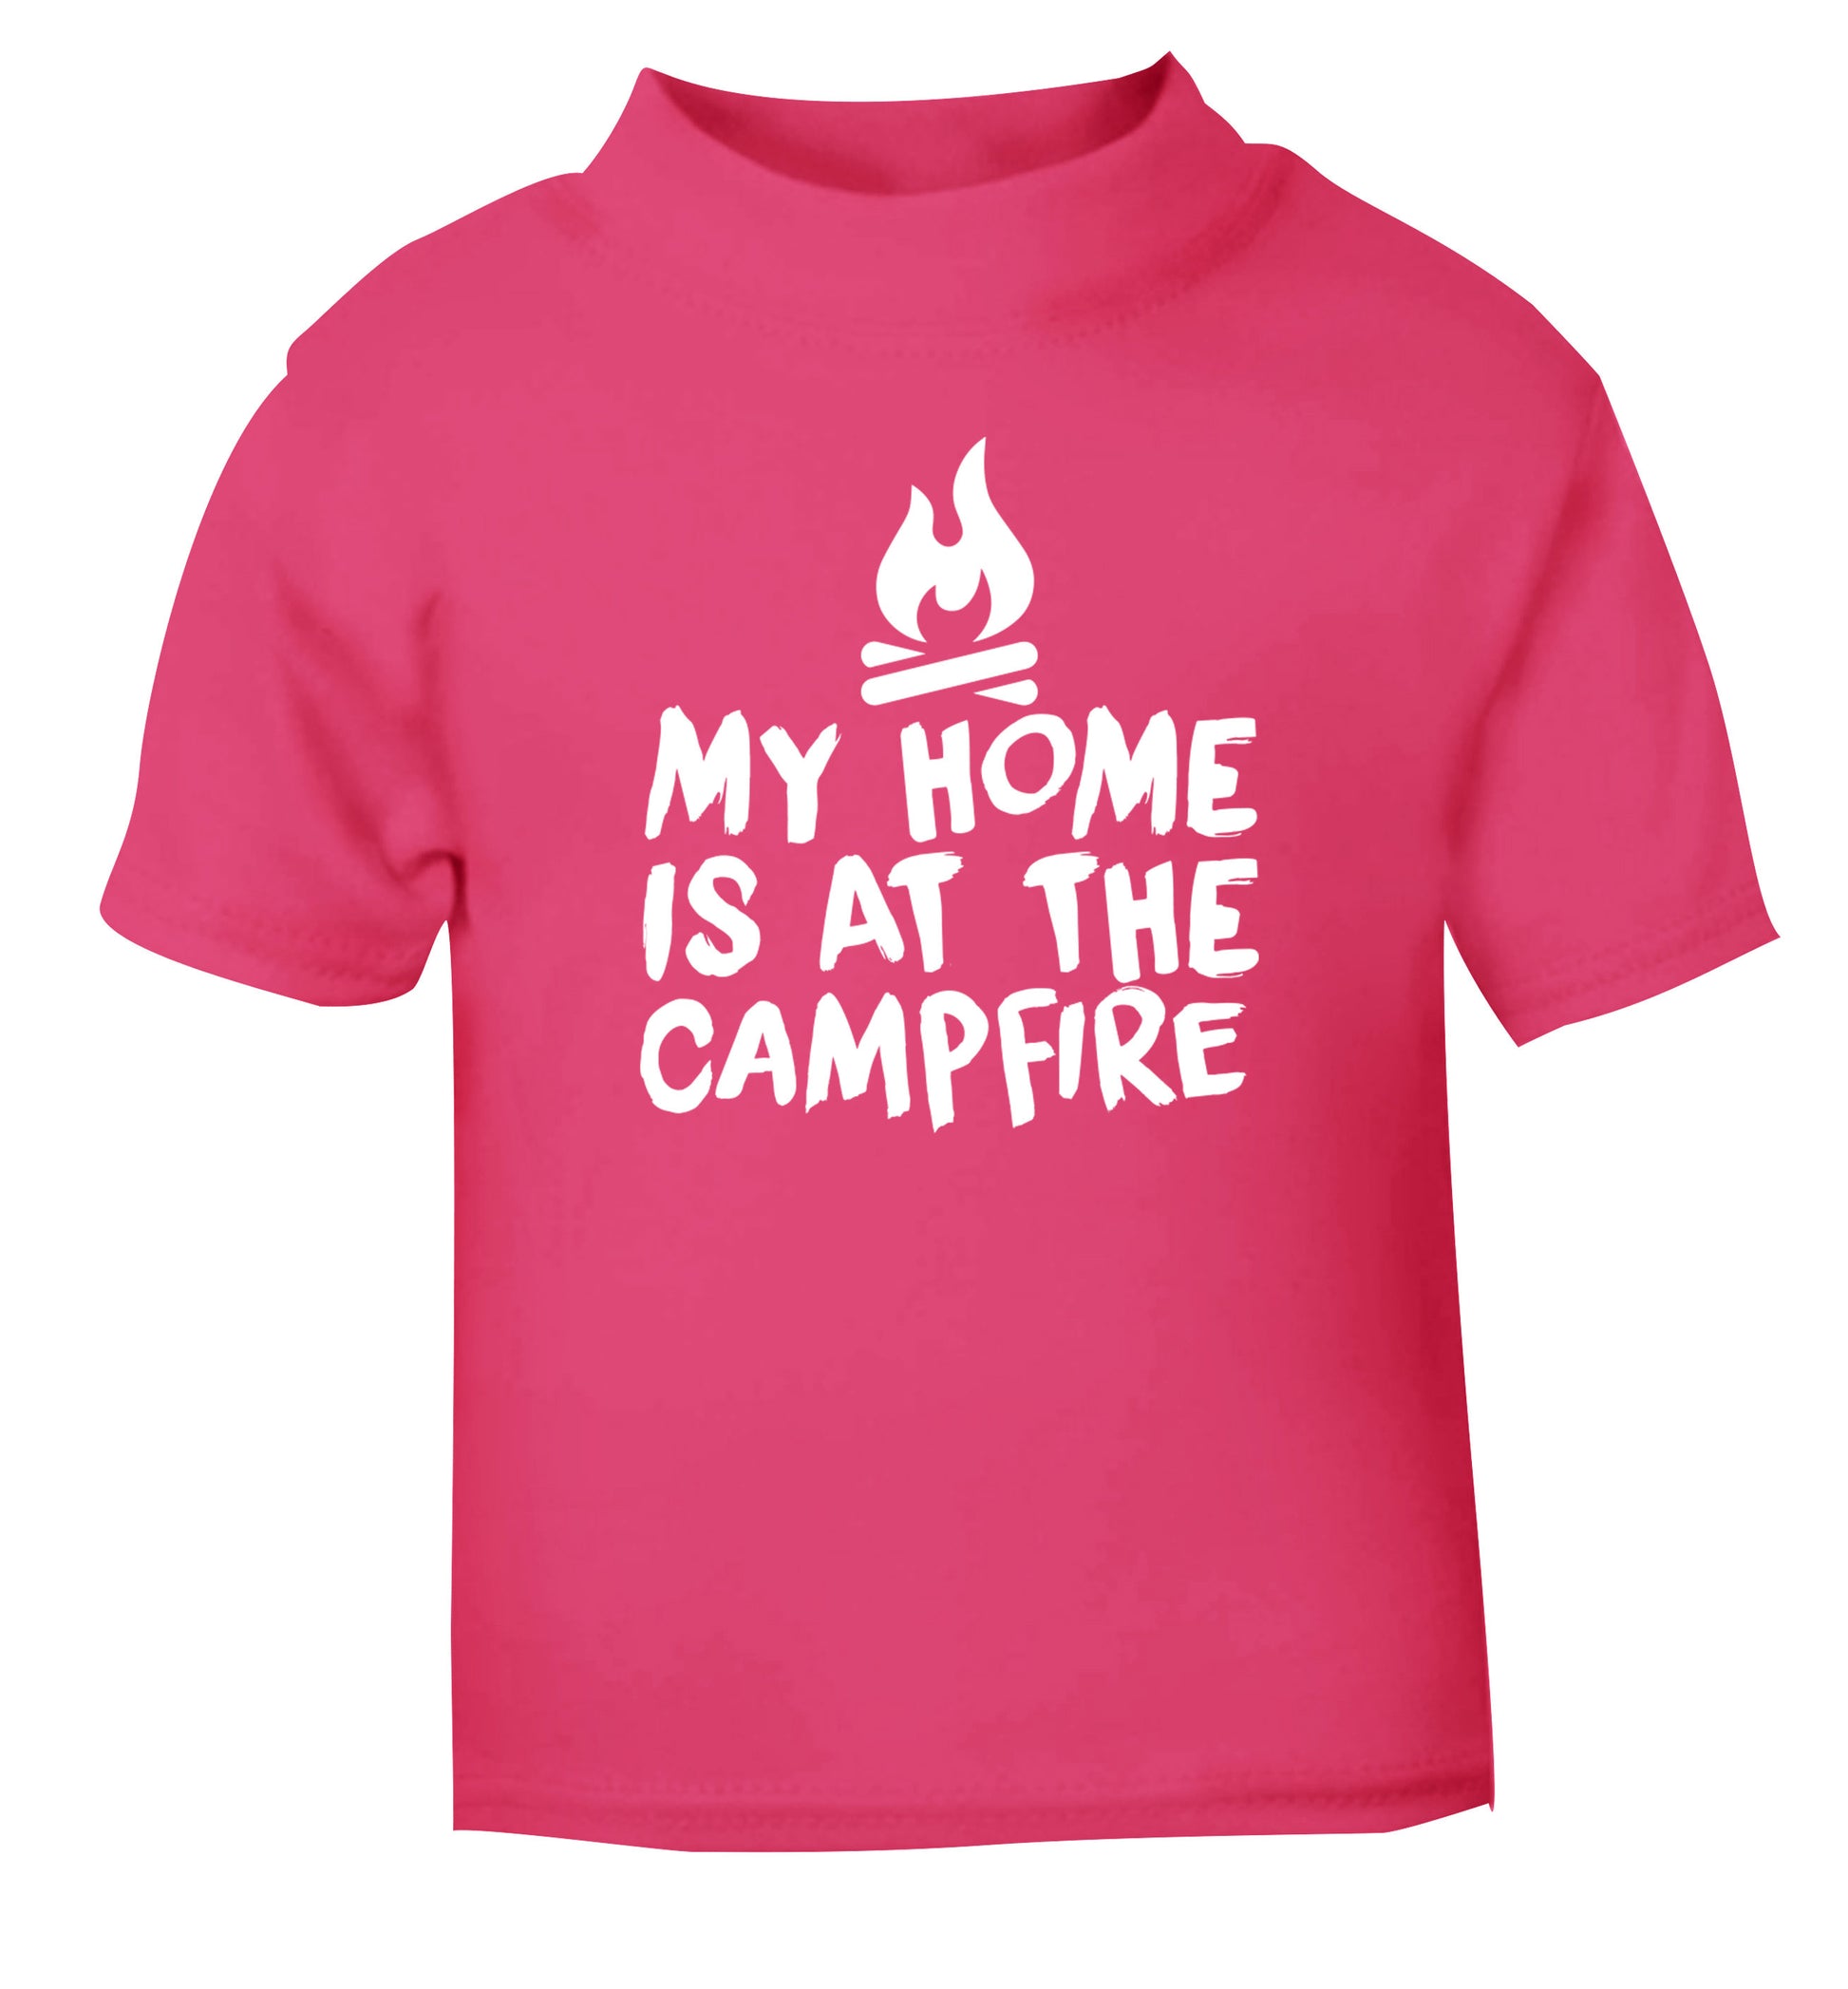 My home is at the campfire pink Baby Toddler Tshirt 2 Years